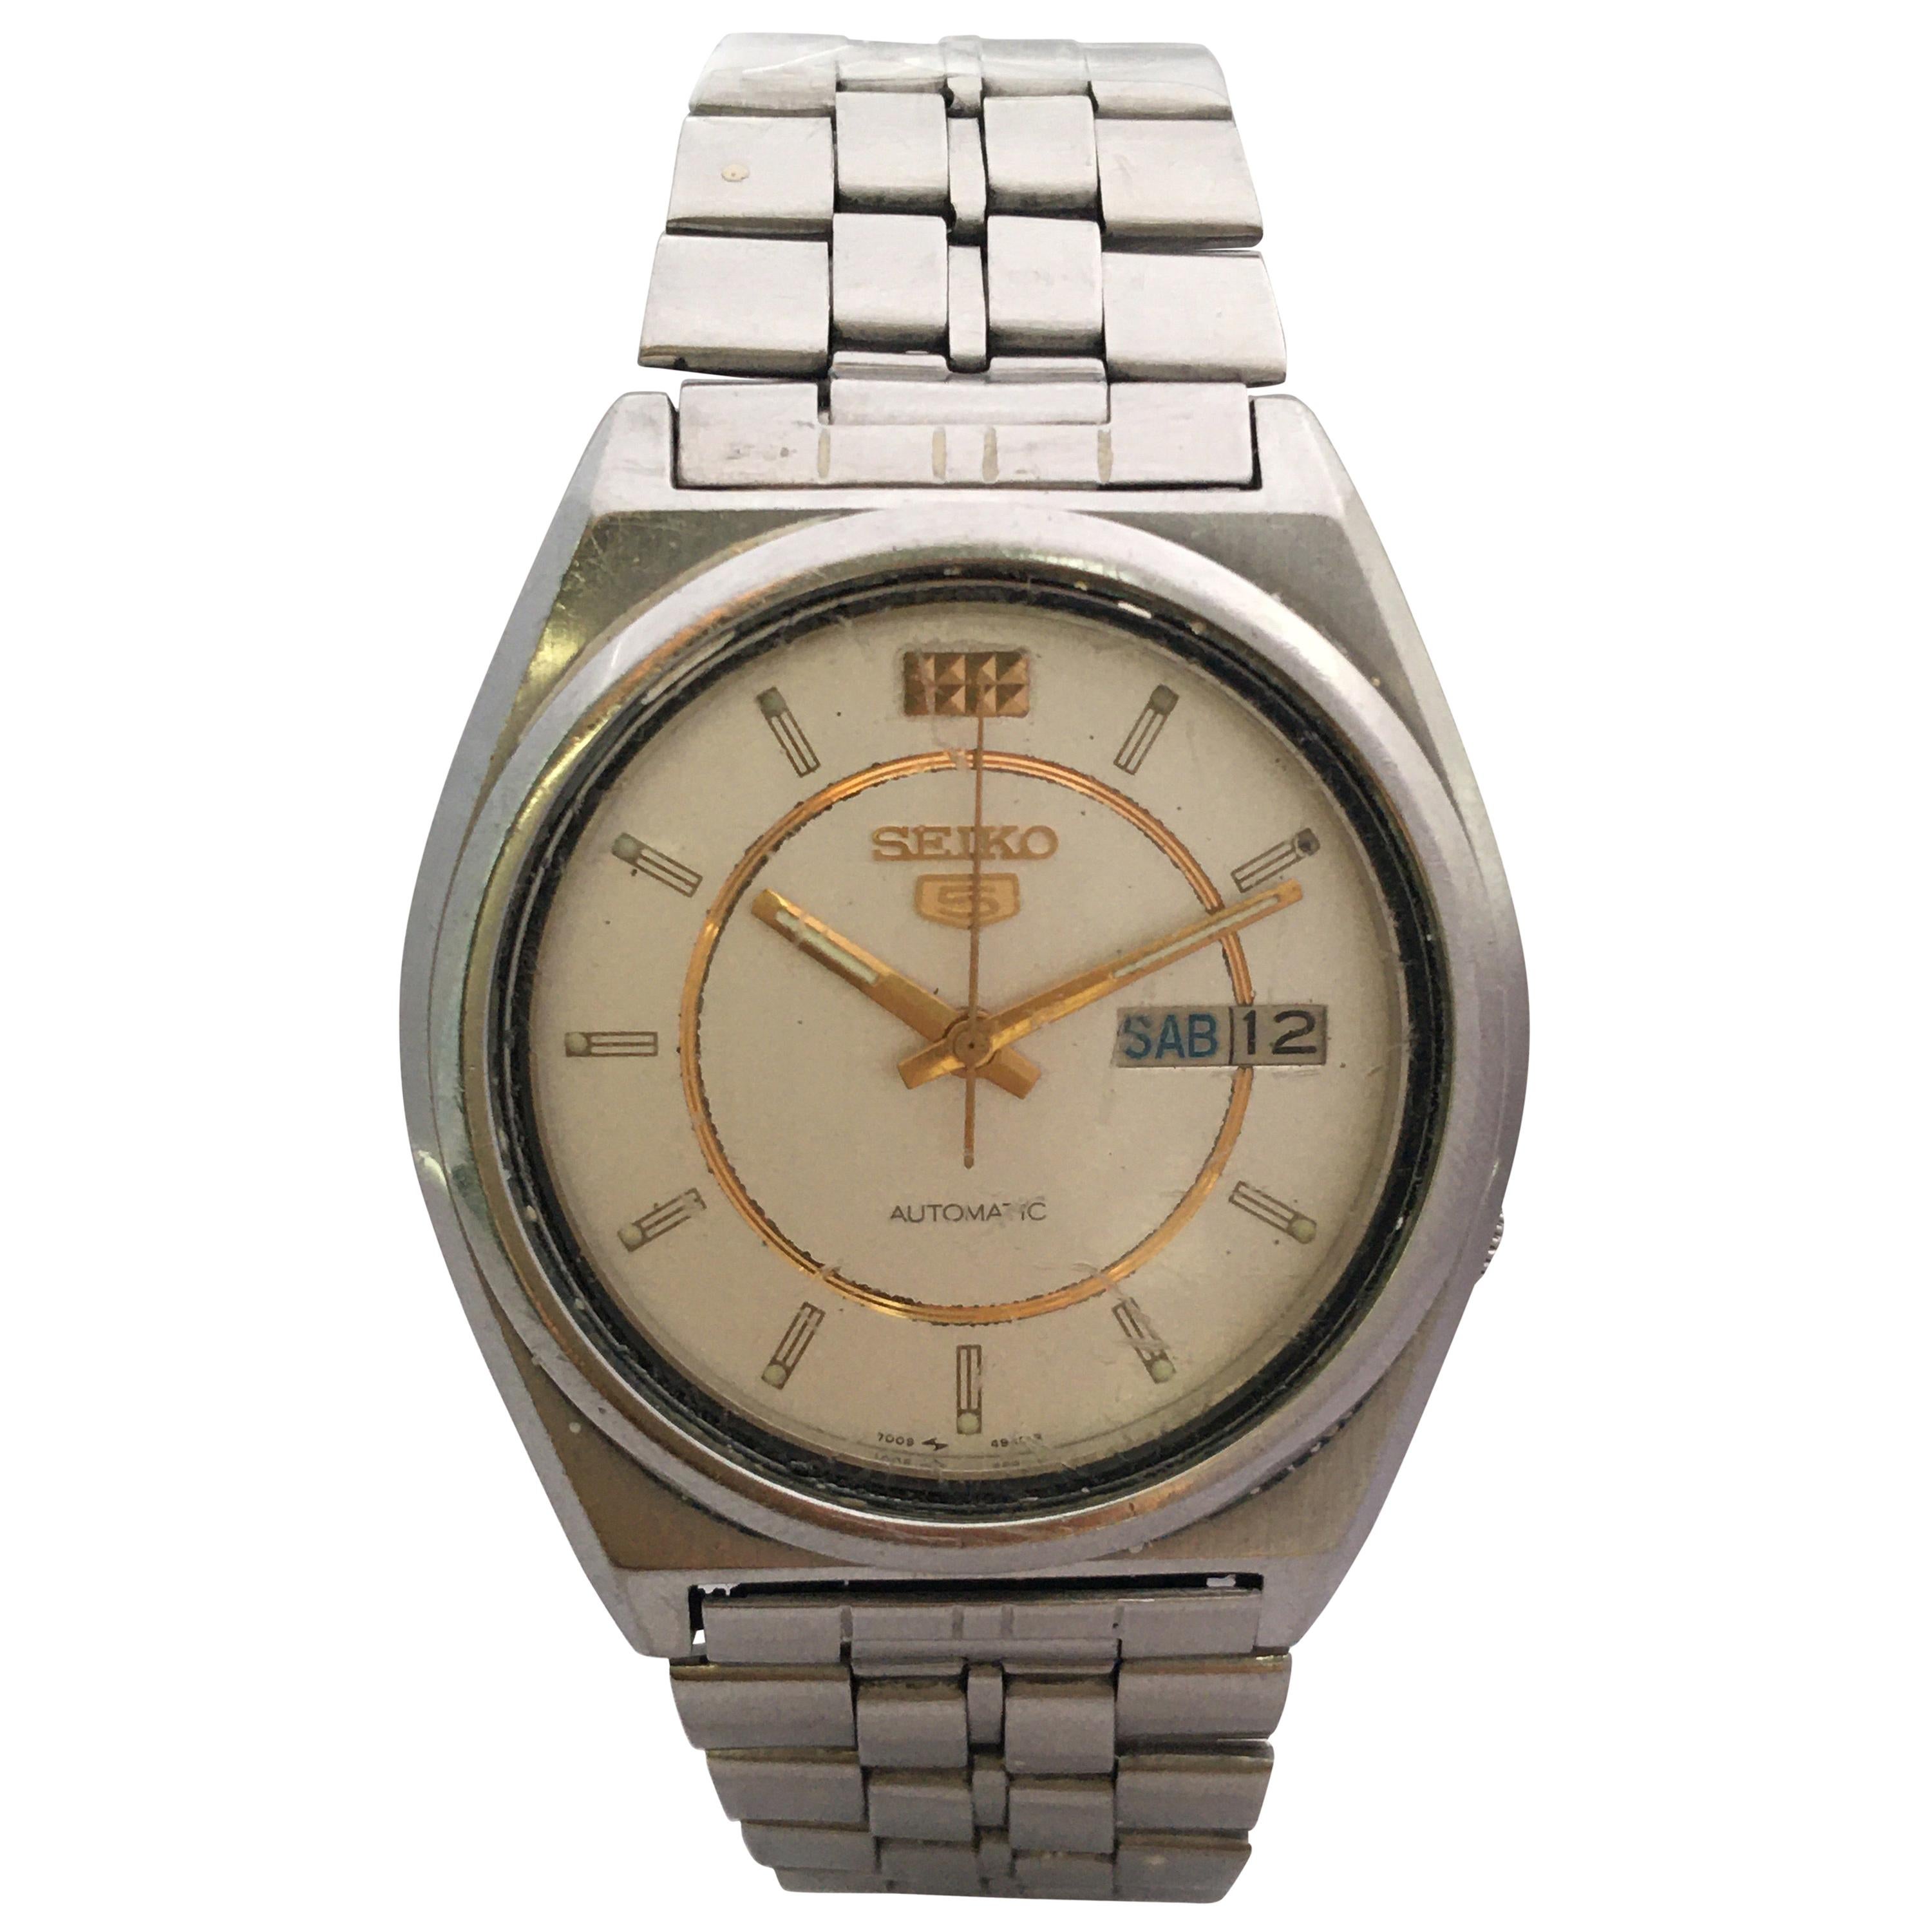 ugunstige mode trussel Vintage 1970s Stainless Steel Seiko 5 Automatic Gents Watch For Sale at  1stDibs | seiko 5 automatic 1970 τιμη, seiko 5 automatic 1970 fiyatları,  seiko 5 automatic vintage 1970